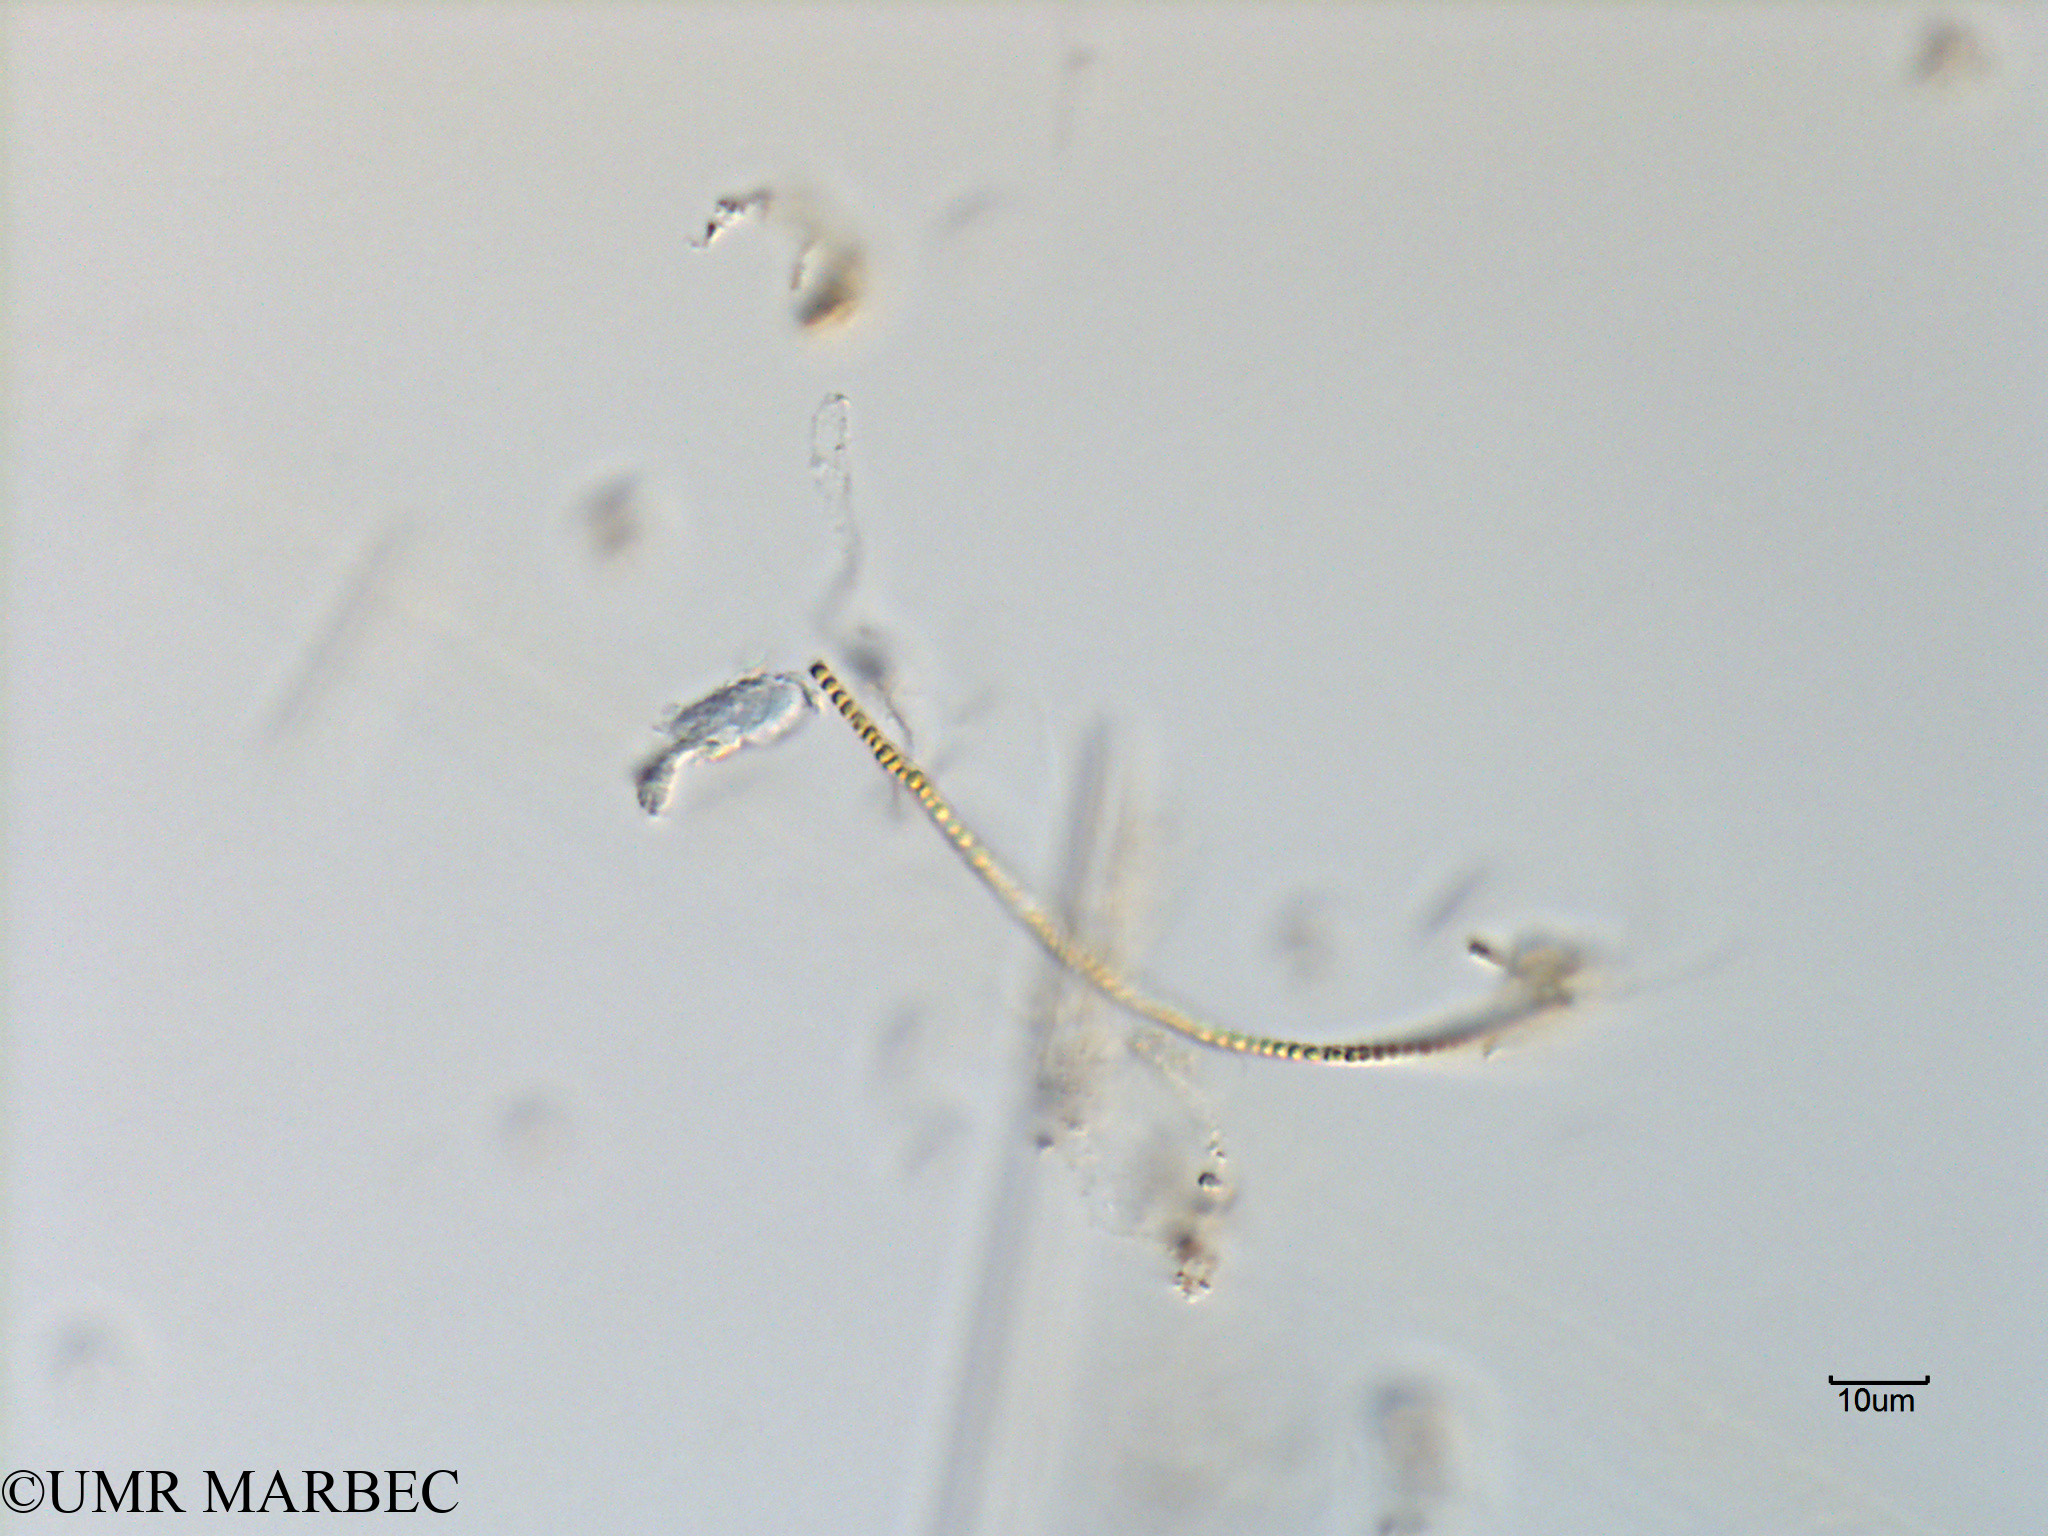 phyto/Scattered_Islands/mayotte_lagoon/SIREME May 2016/Oscillatoriale spp (MAY11_cyano2).tif(copy).jpg